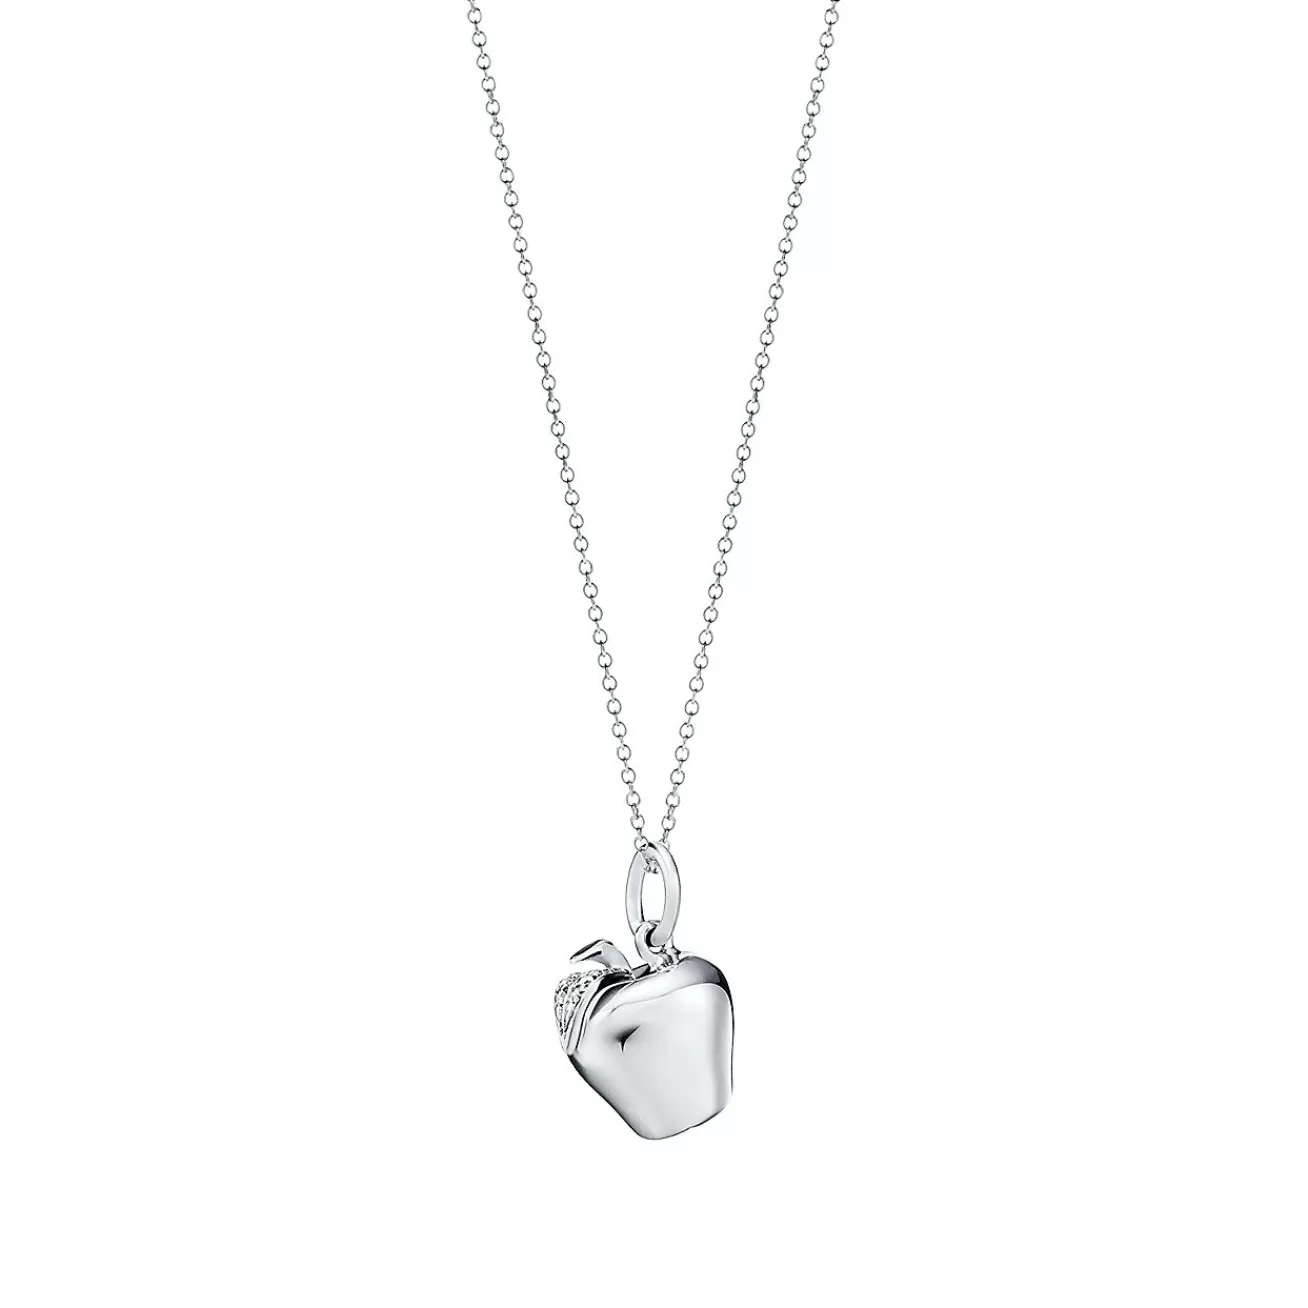 Tiffany & Co. Apple charm in sterling silver on a chain. | ^ Sterling Silver Jewelry